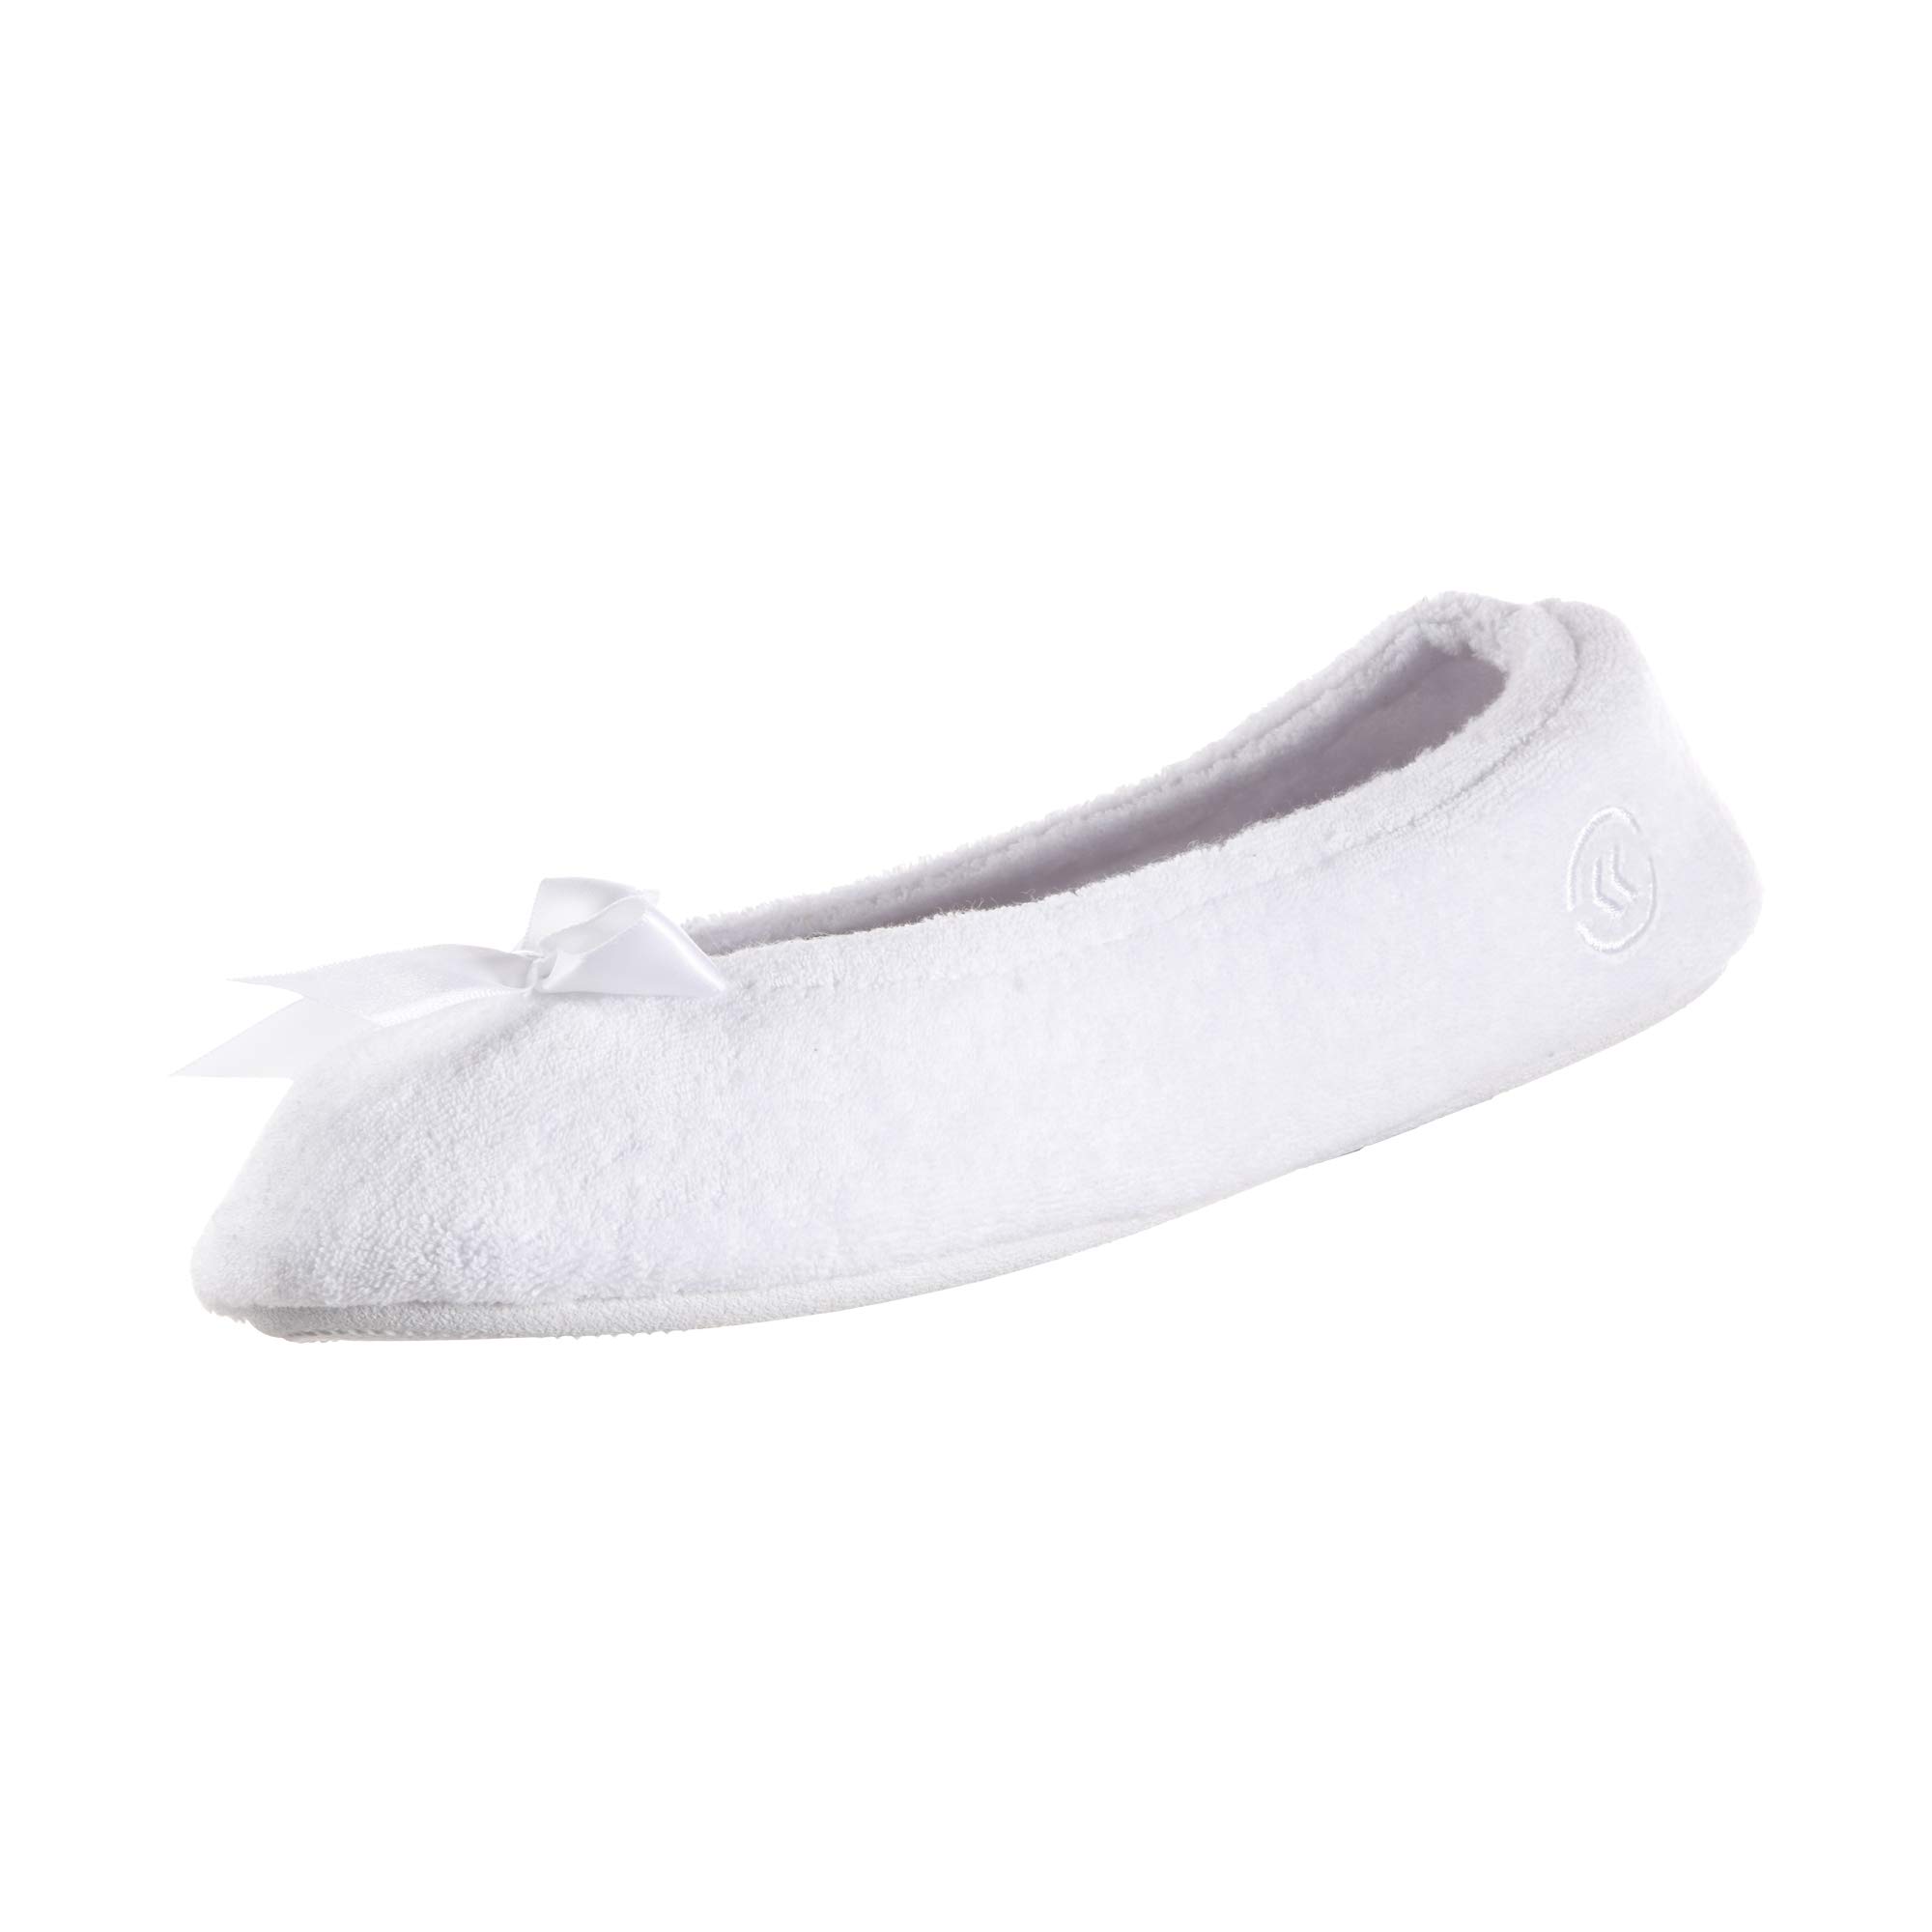 isotoner Womens Terry Ballerina Slipper with Bow for IndoorOutdoor comfort, White, 95-105